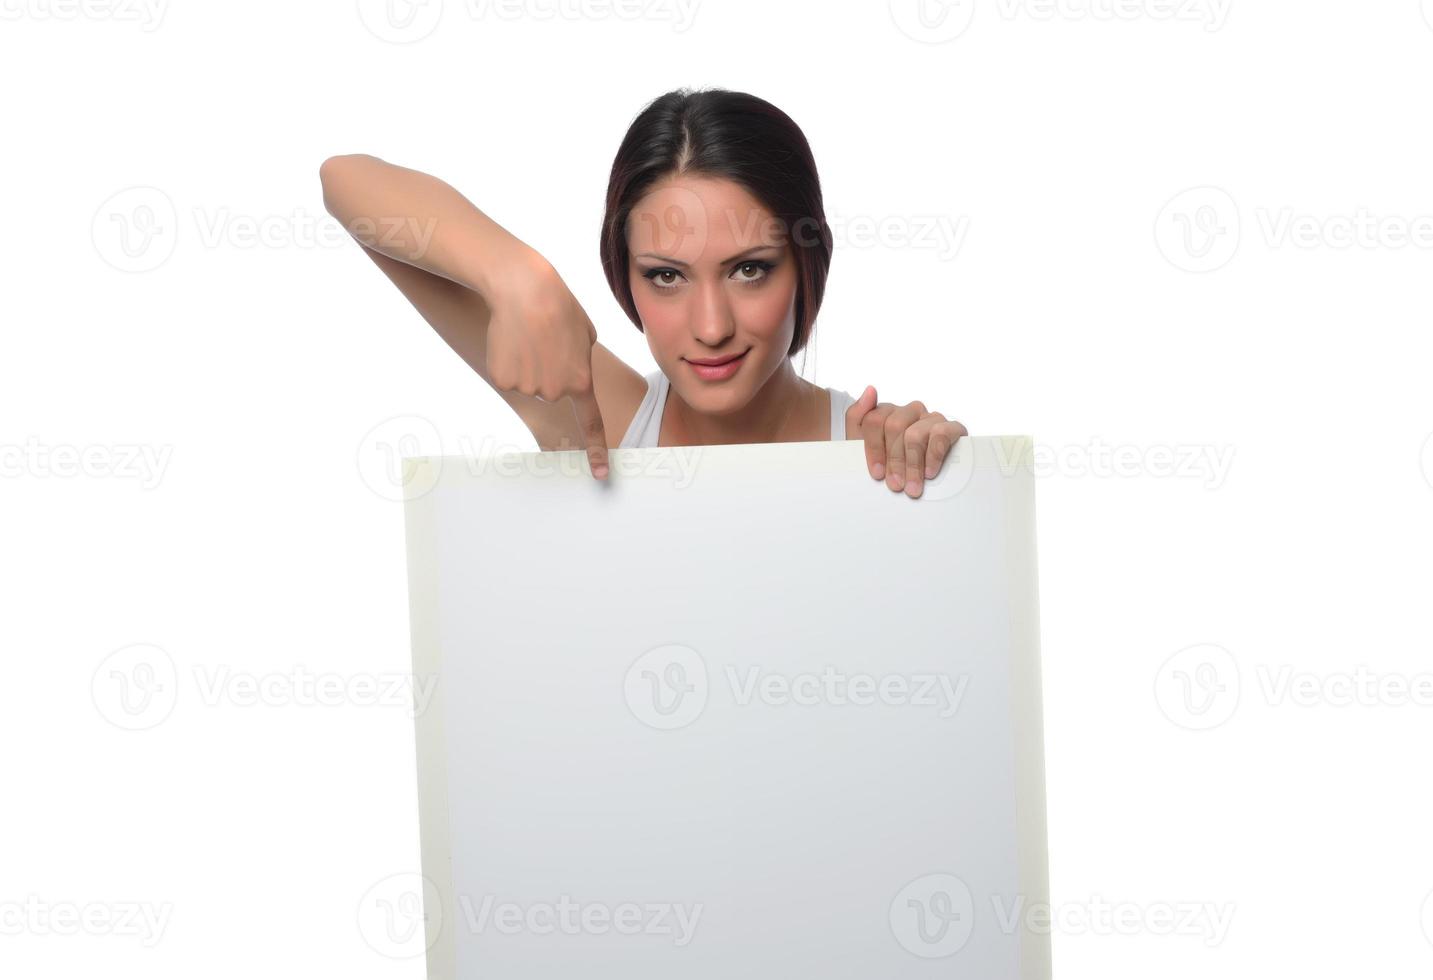 young smiling woman holding a blank sheet of paper for advertising photo